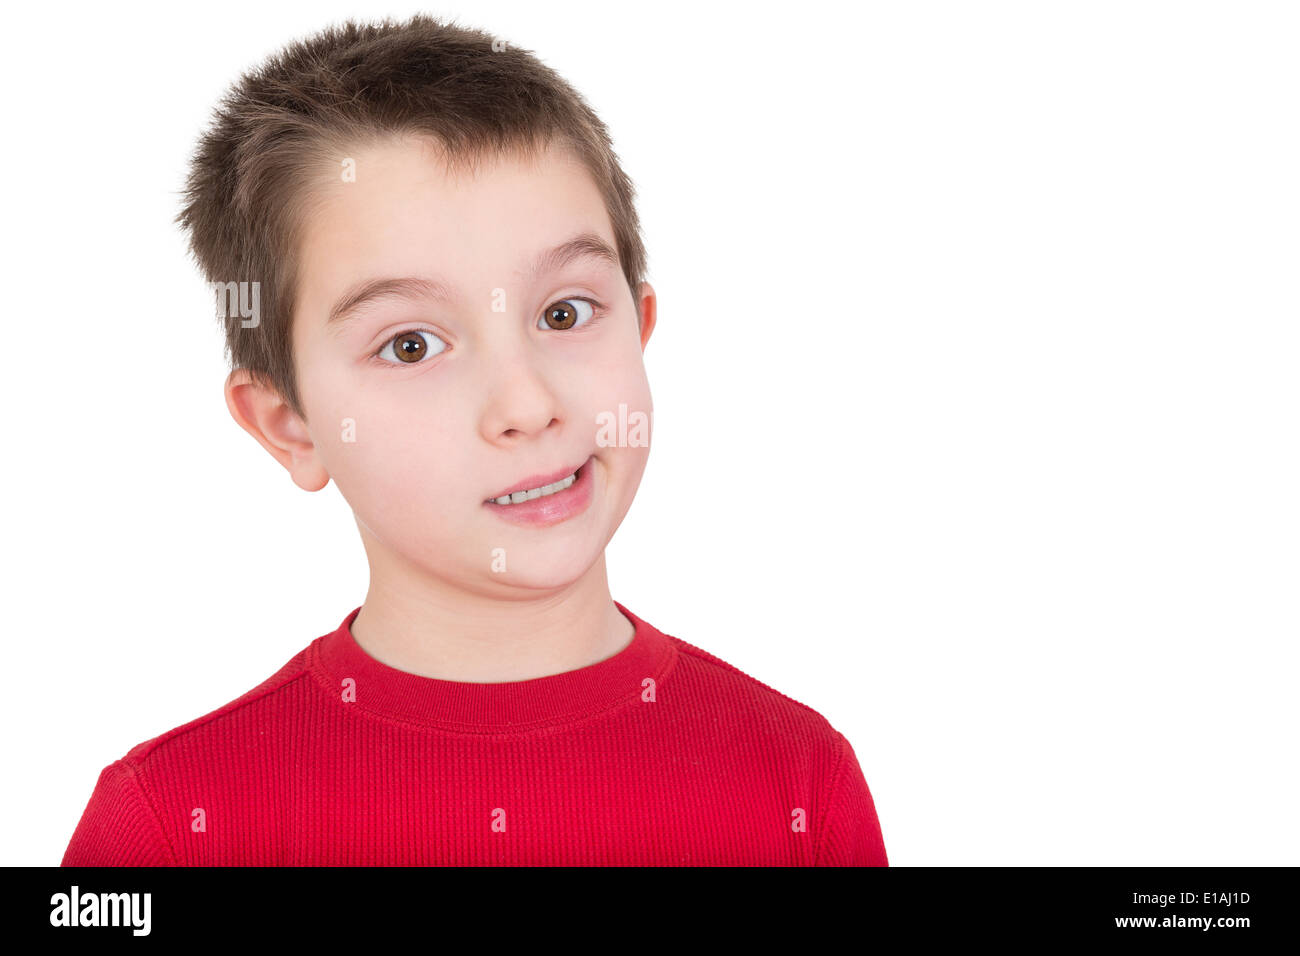 Skeptical young boy reacting in disbelief smiling ruefully and raising an eyebrow, isolated on white Stock Photo